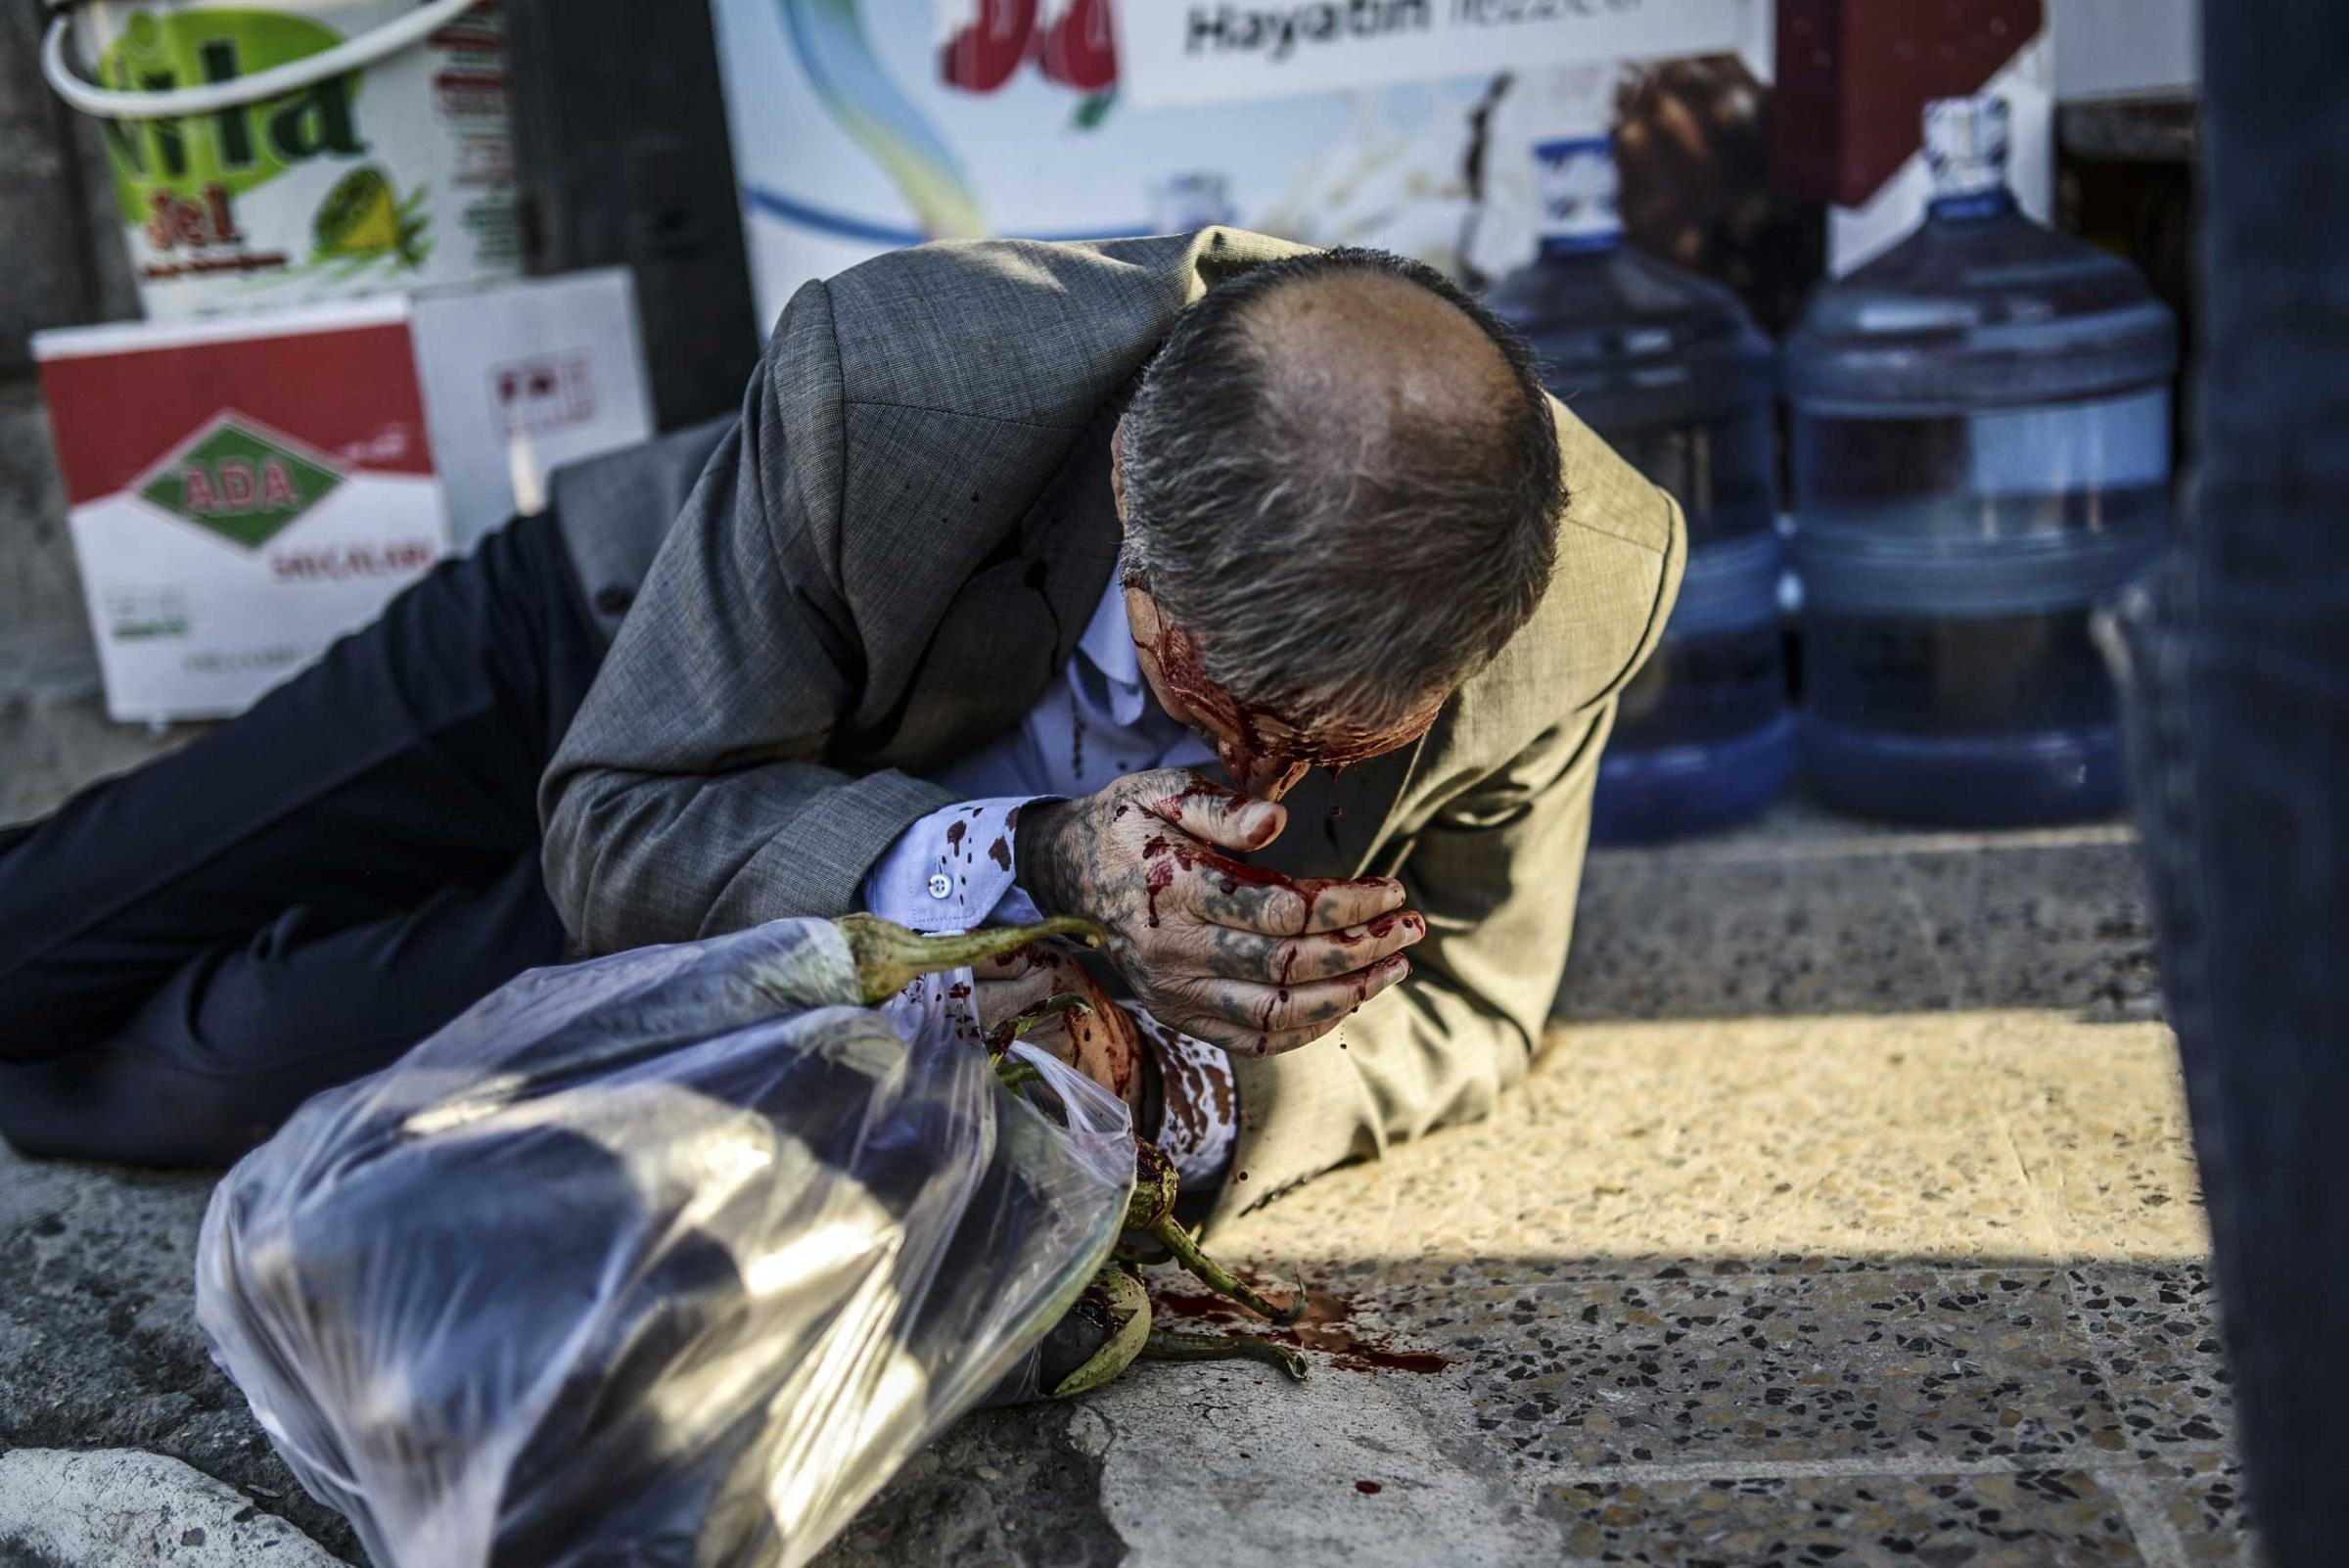 A Kurdish man bleeds after being injured while walking in the center of Suruc during clashes between protestors and Turkish riot policemen after authorities temporarily closed the border at the southeastern town of Suruc in Sanliurfa province, on Sept. 22, 2014.